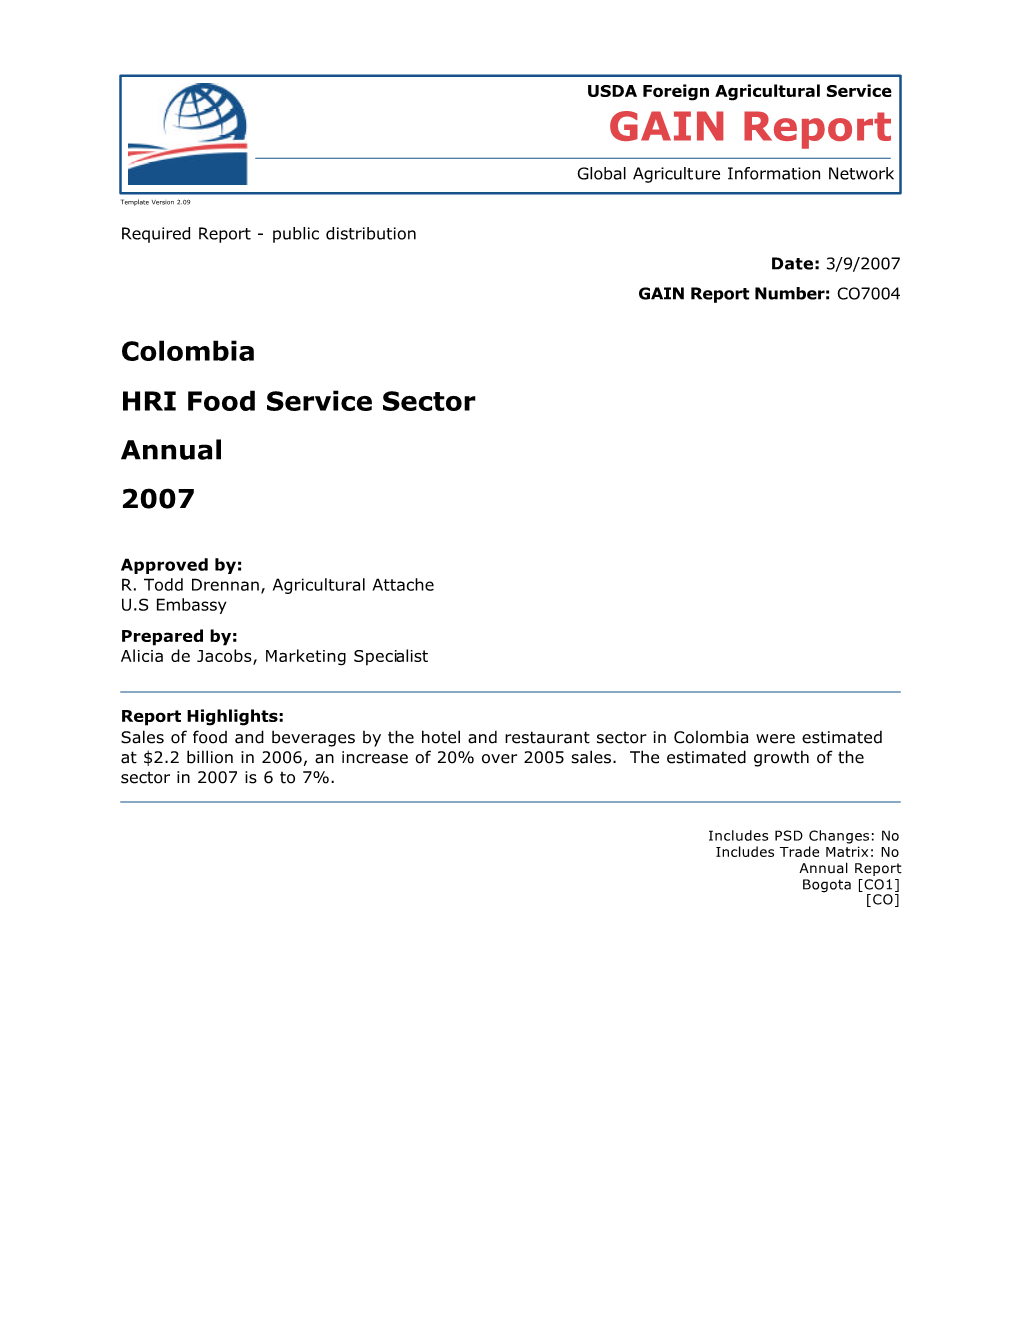 Colombia HRI Food Service Sector Annual 2007